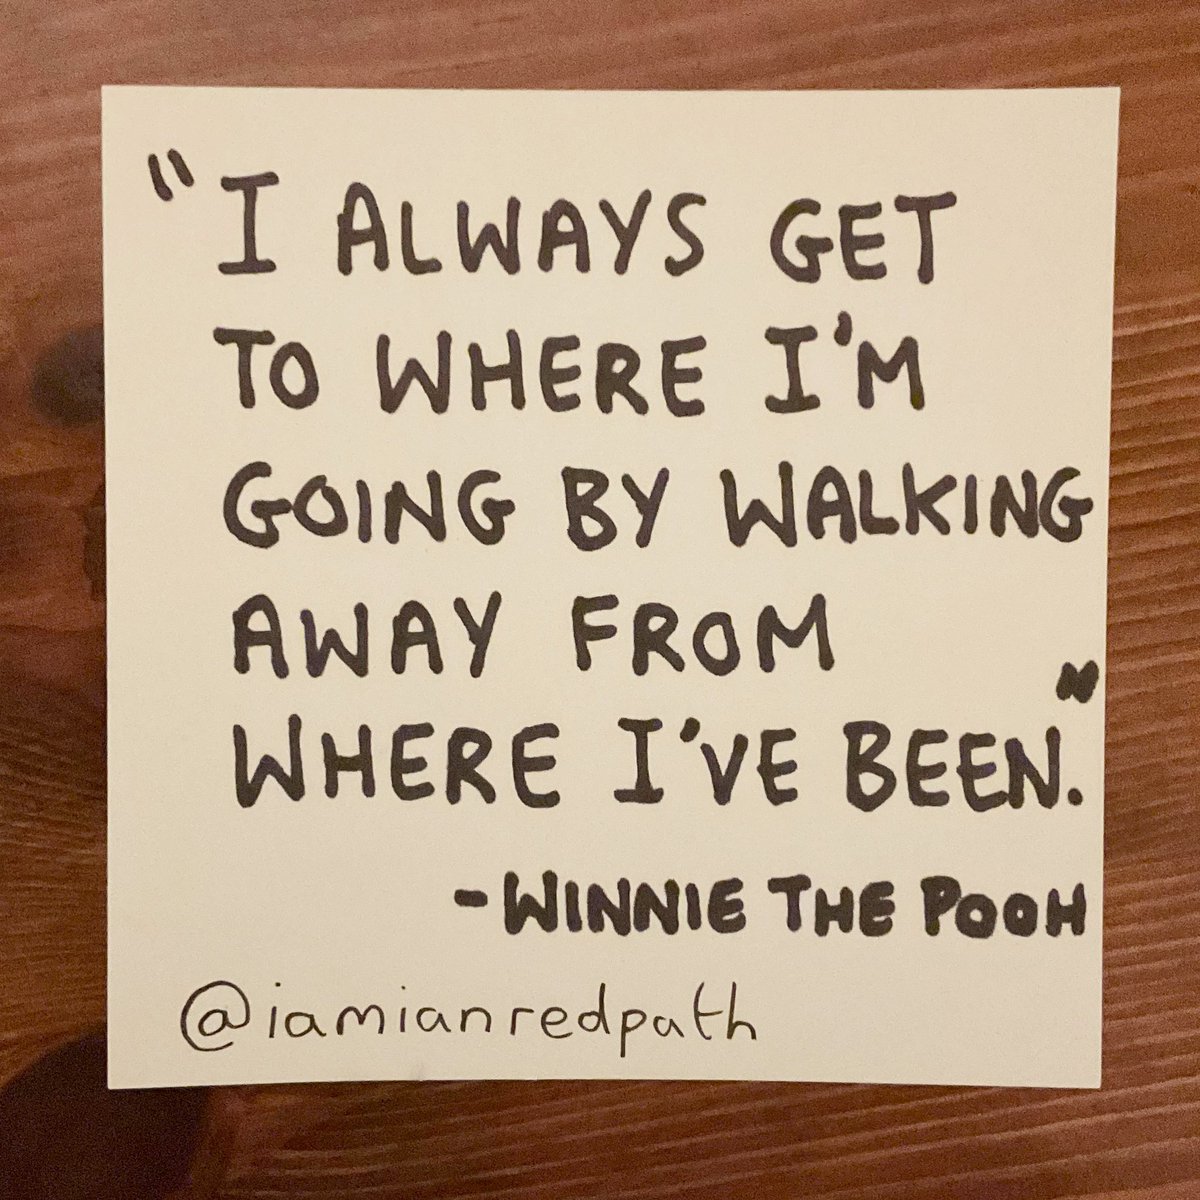 “I always get to where I’m going by walking away from where I’ve been” - Winnie the Pooh, A.A.Milne 

#WinnieThePooh #WinnieThePoohDay #AAMilne